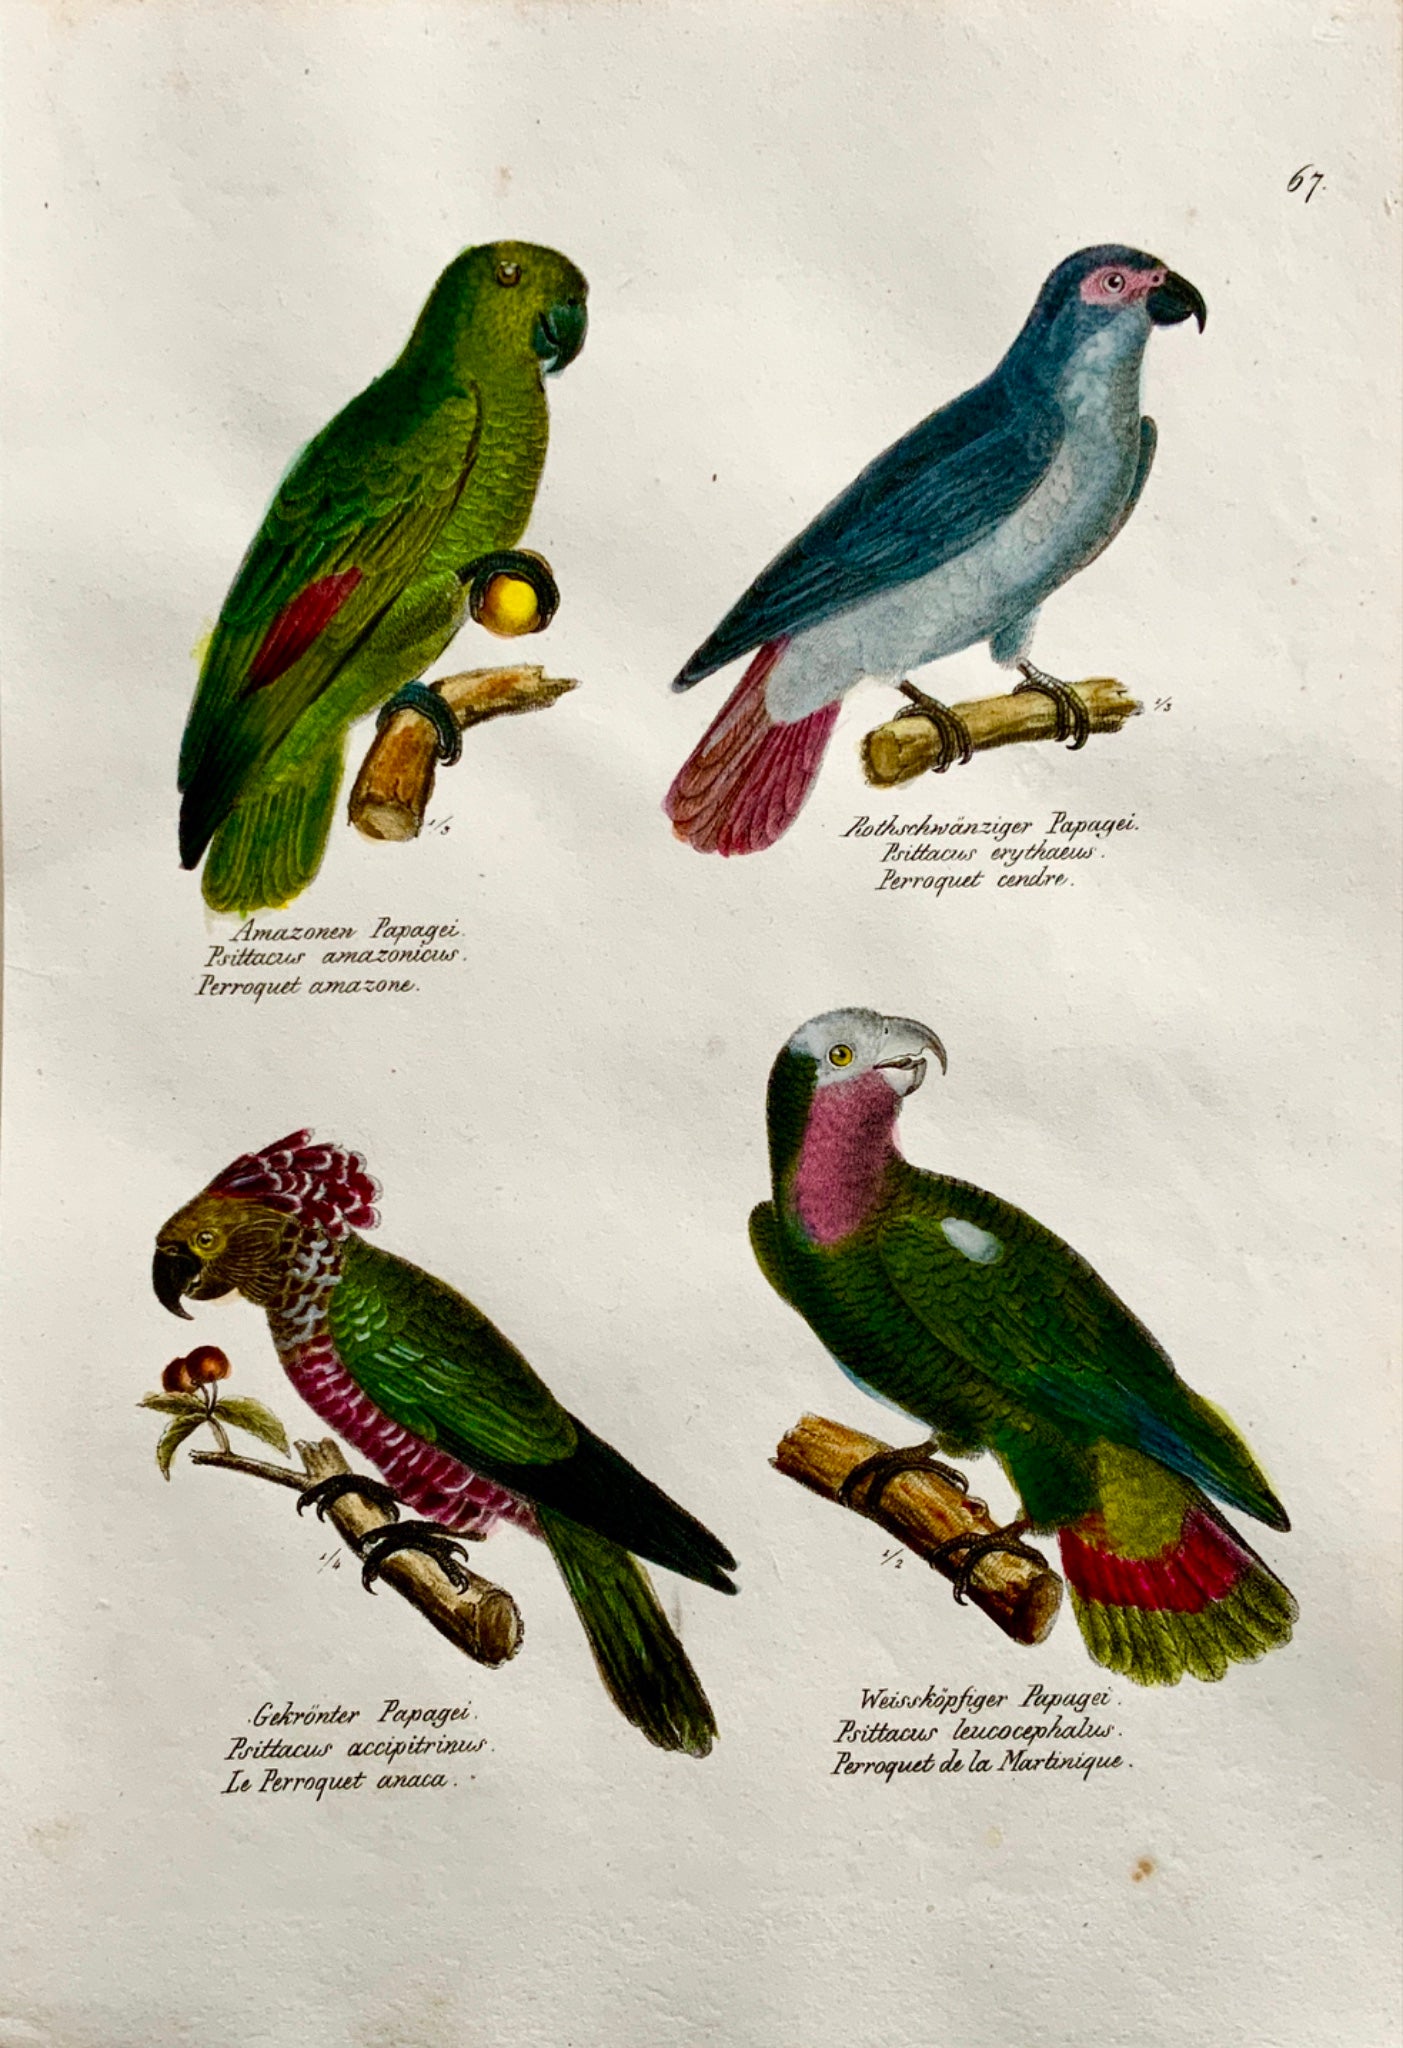 1830 PARROTS Ornithology - Brodtmann hand coloured FOLIO lithography